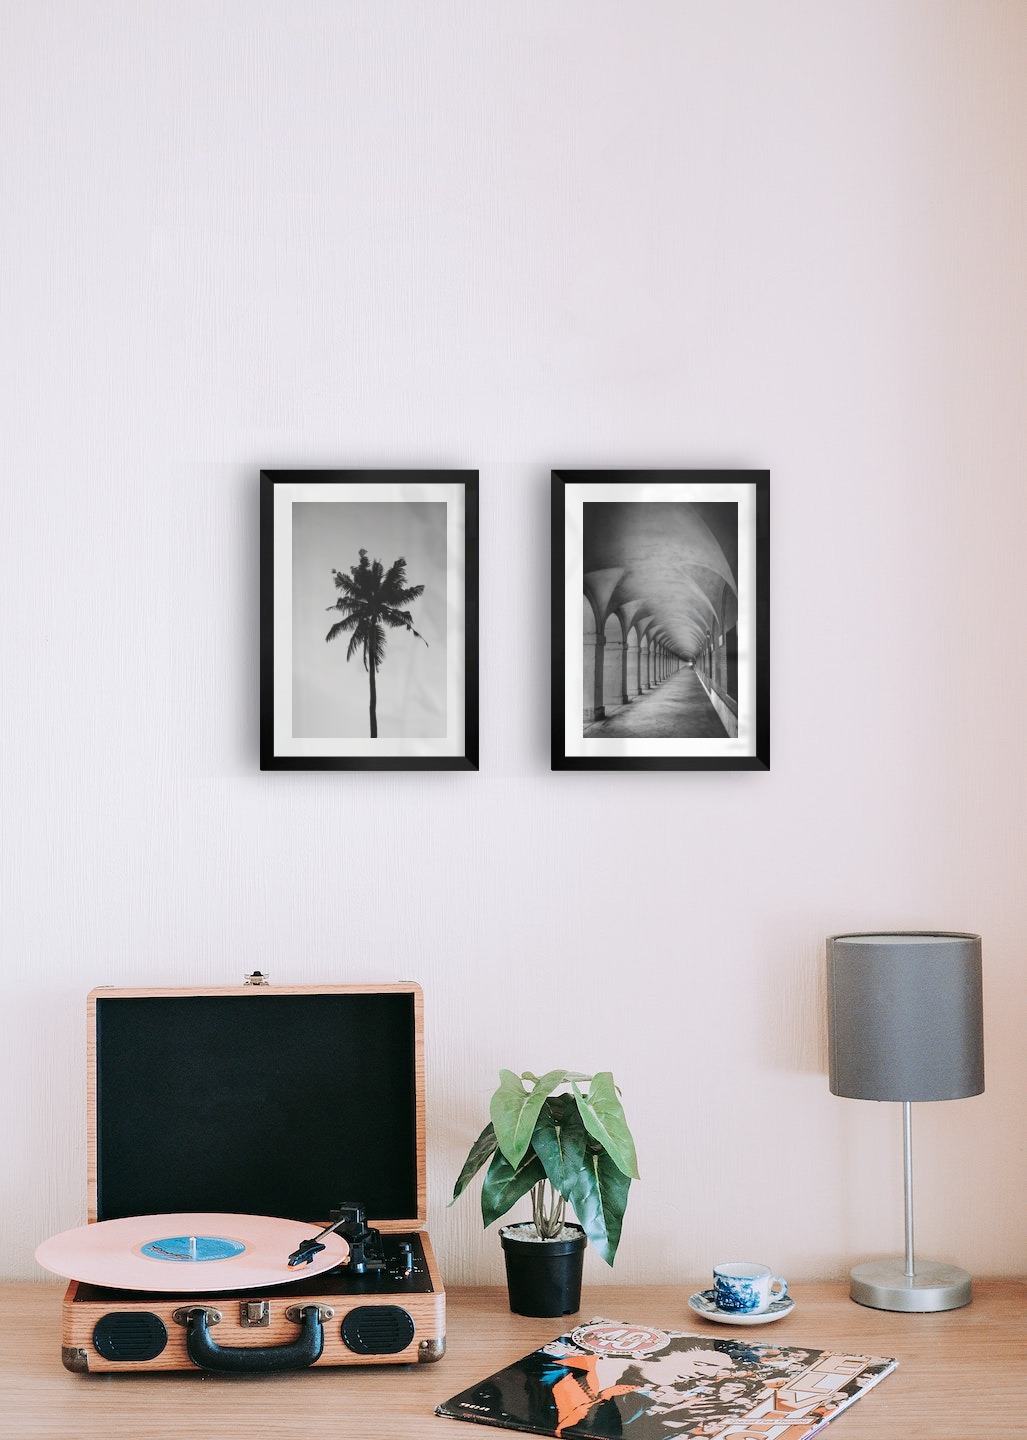 Gallery wall with picture frames in black in sizes 21x30 with prints "Palm" and "Hallway with pillars and arches"